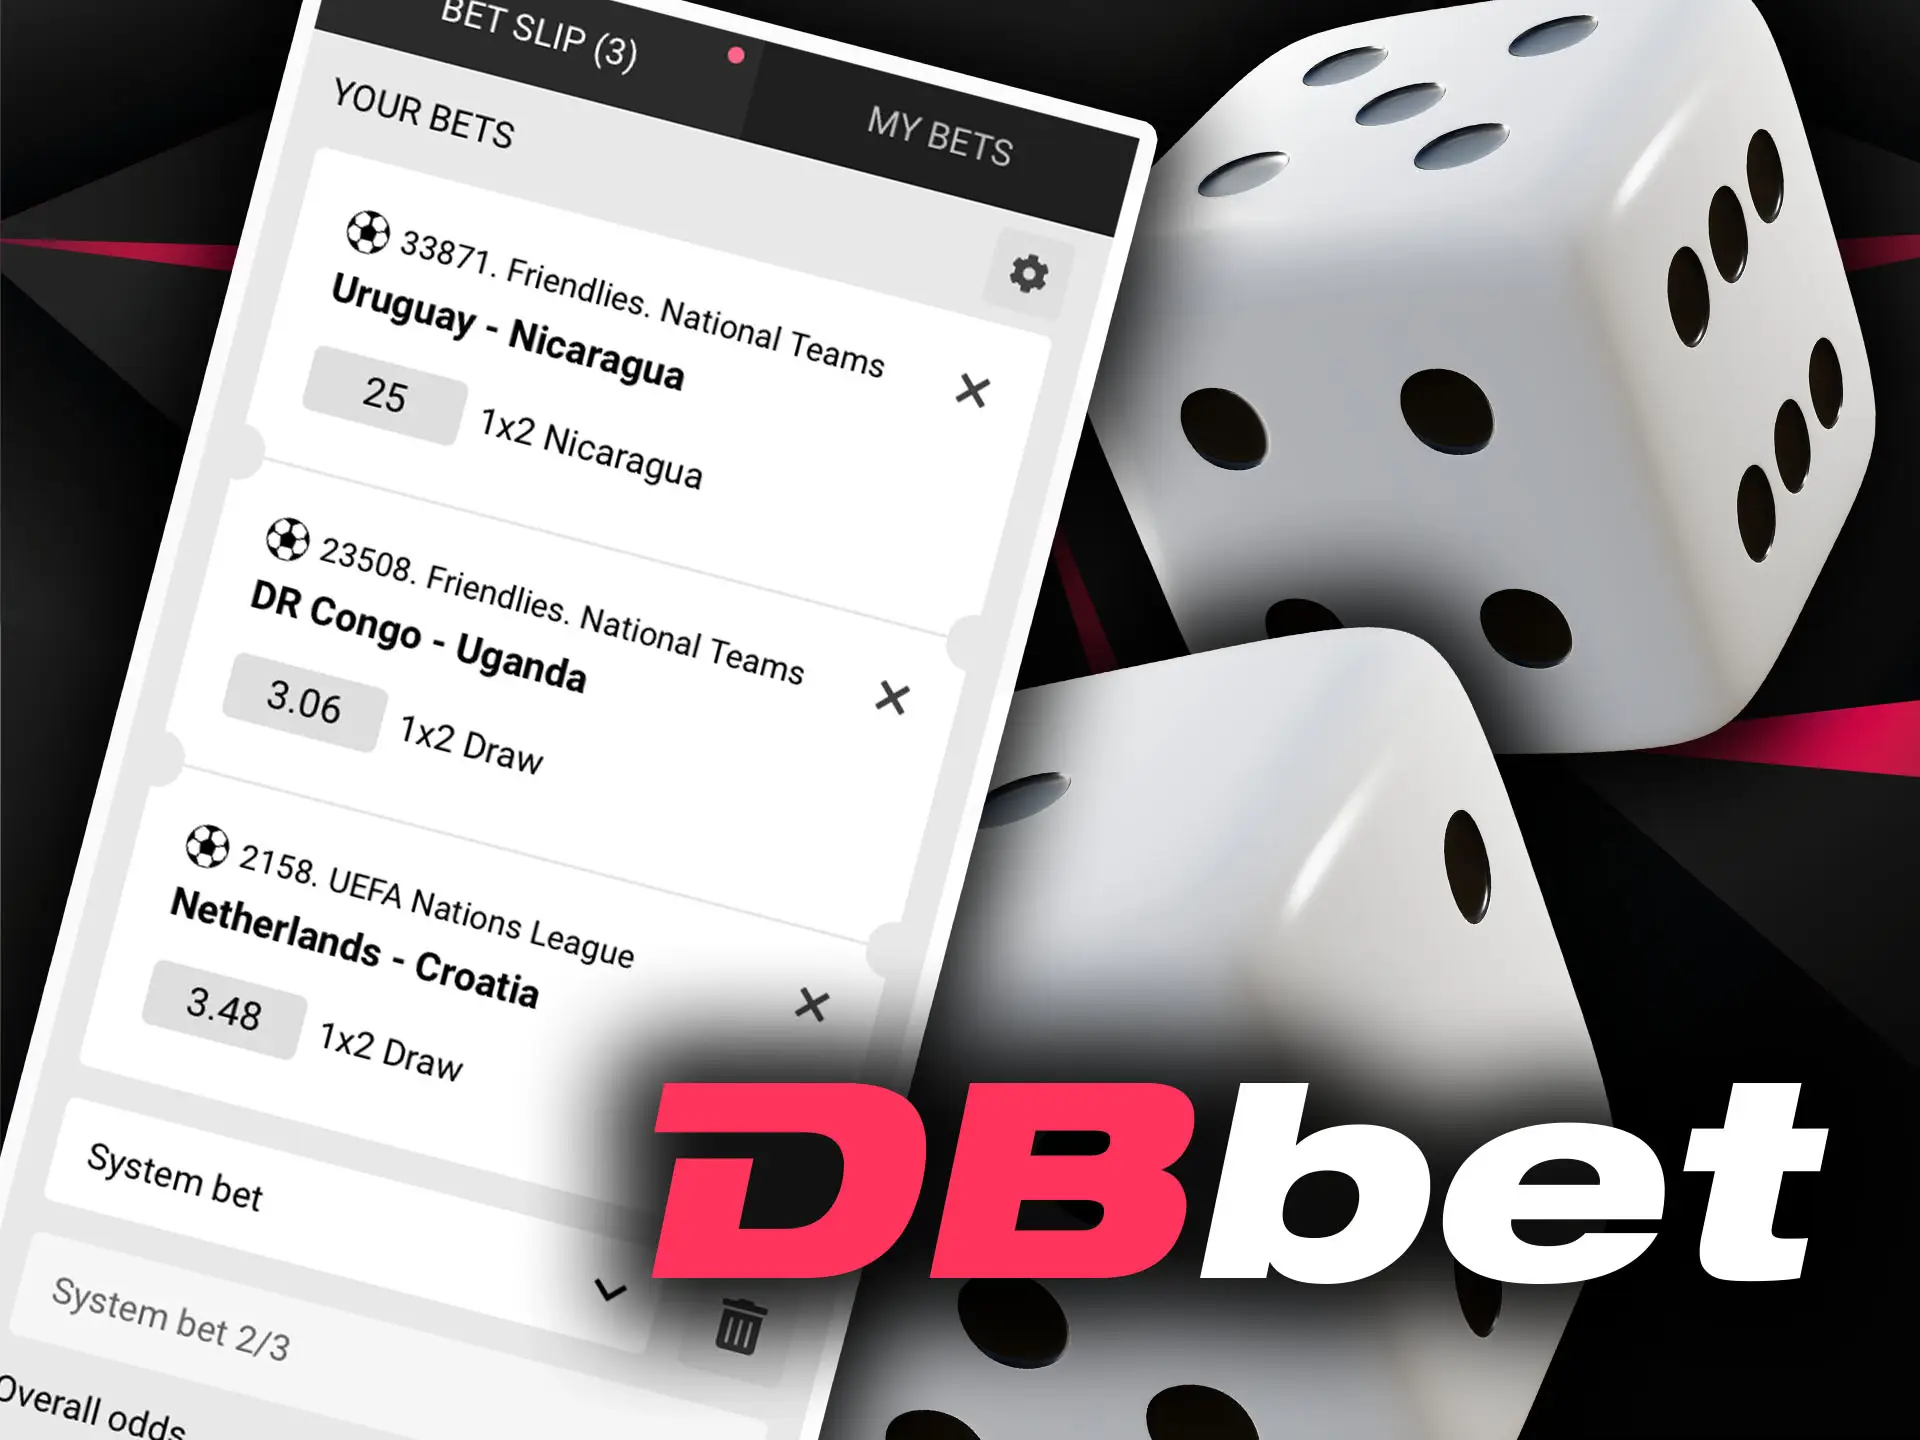 System bets are great for more experienced players on DBbet.